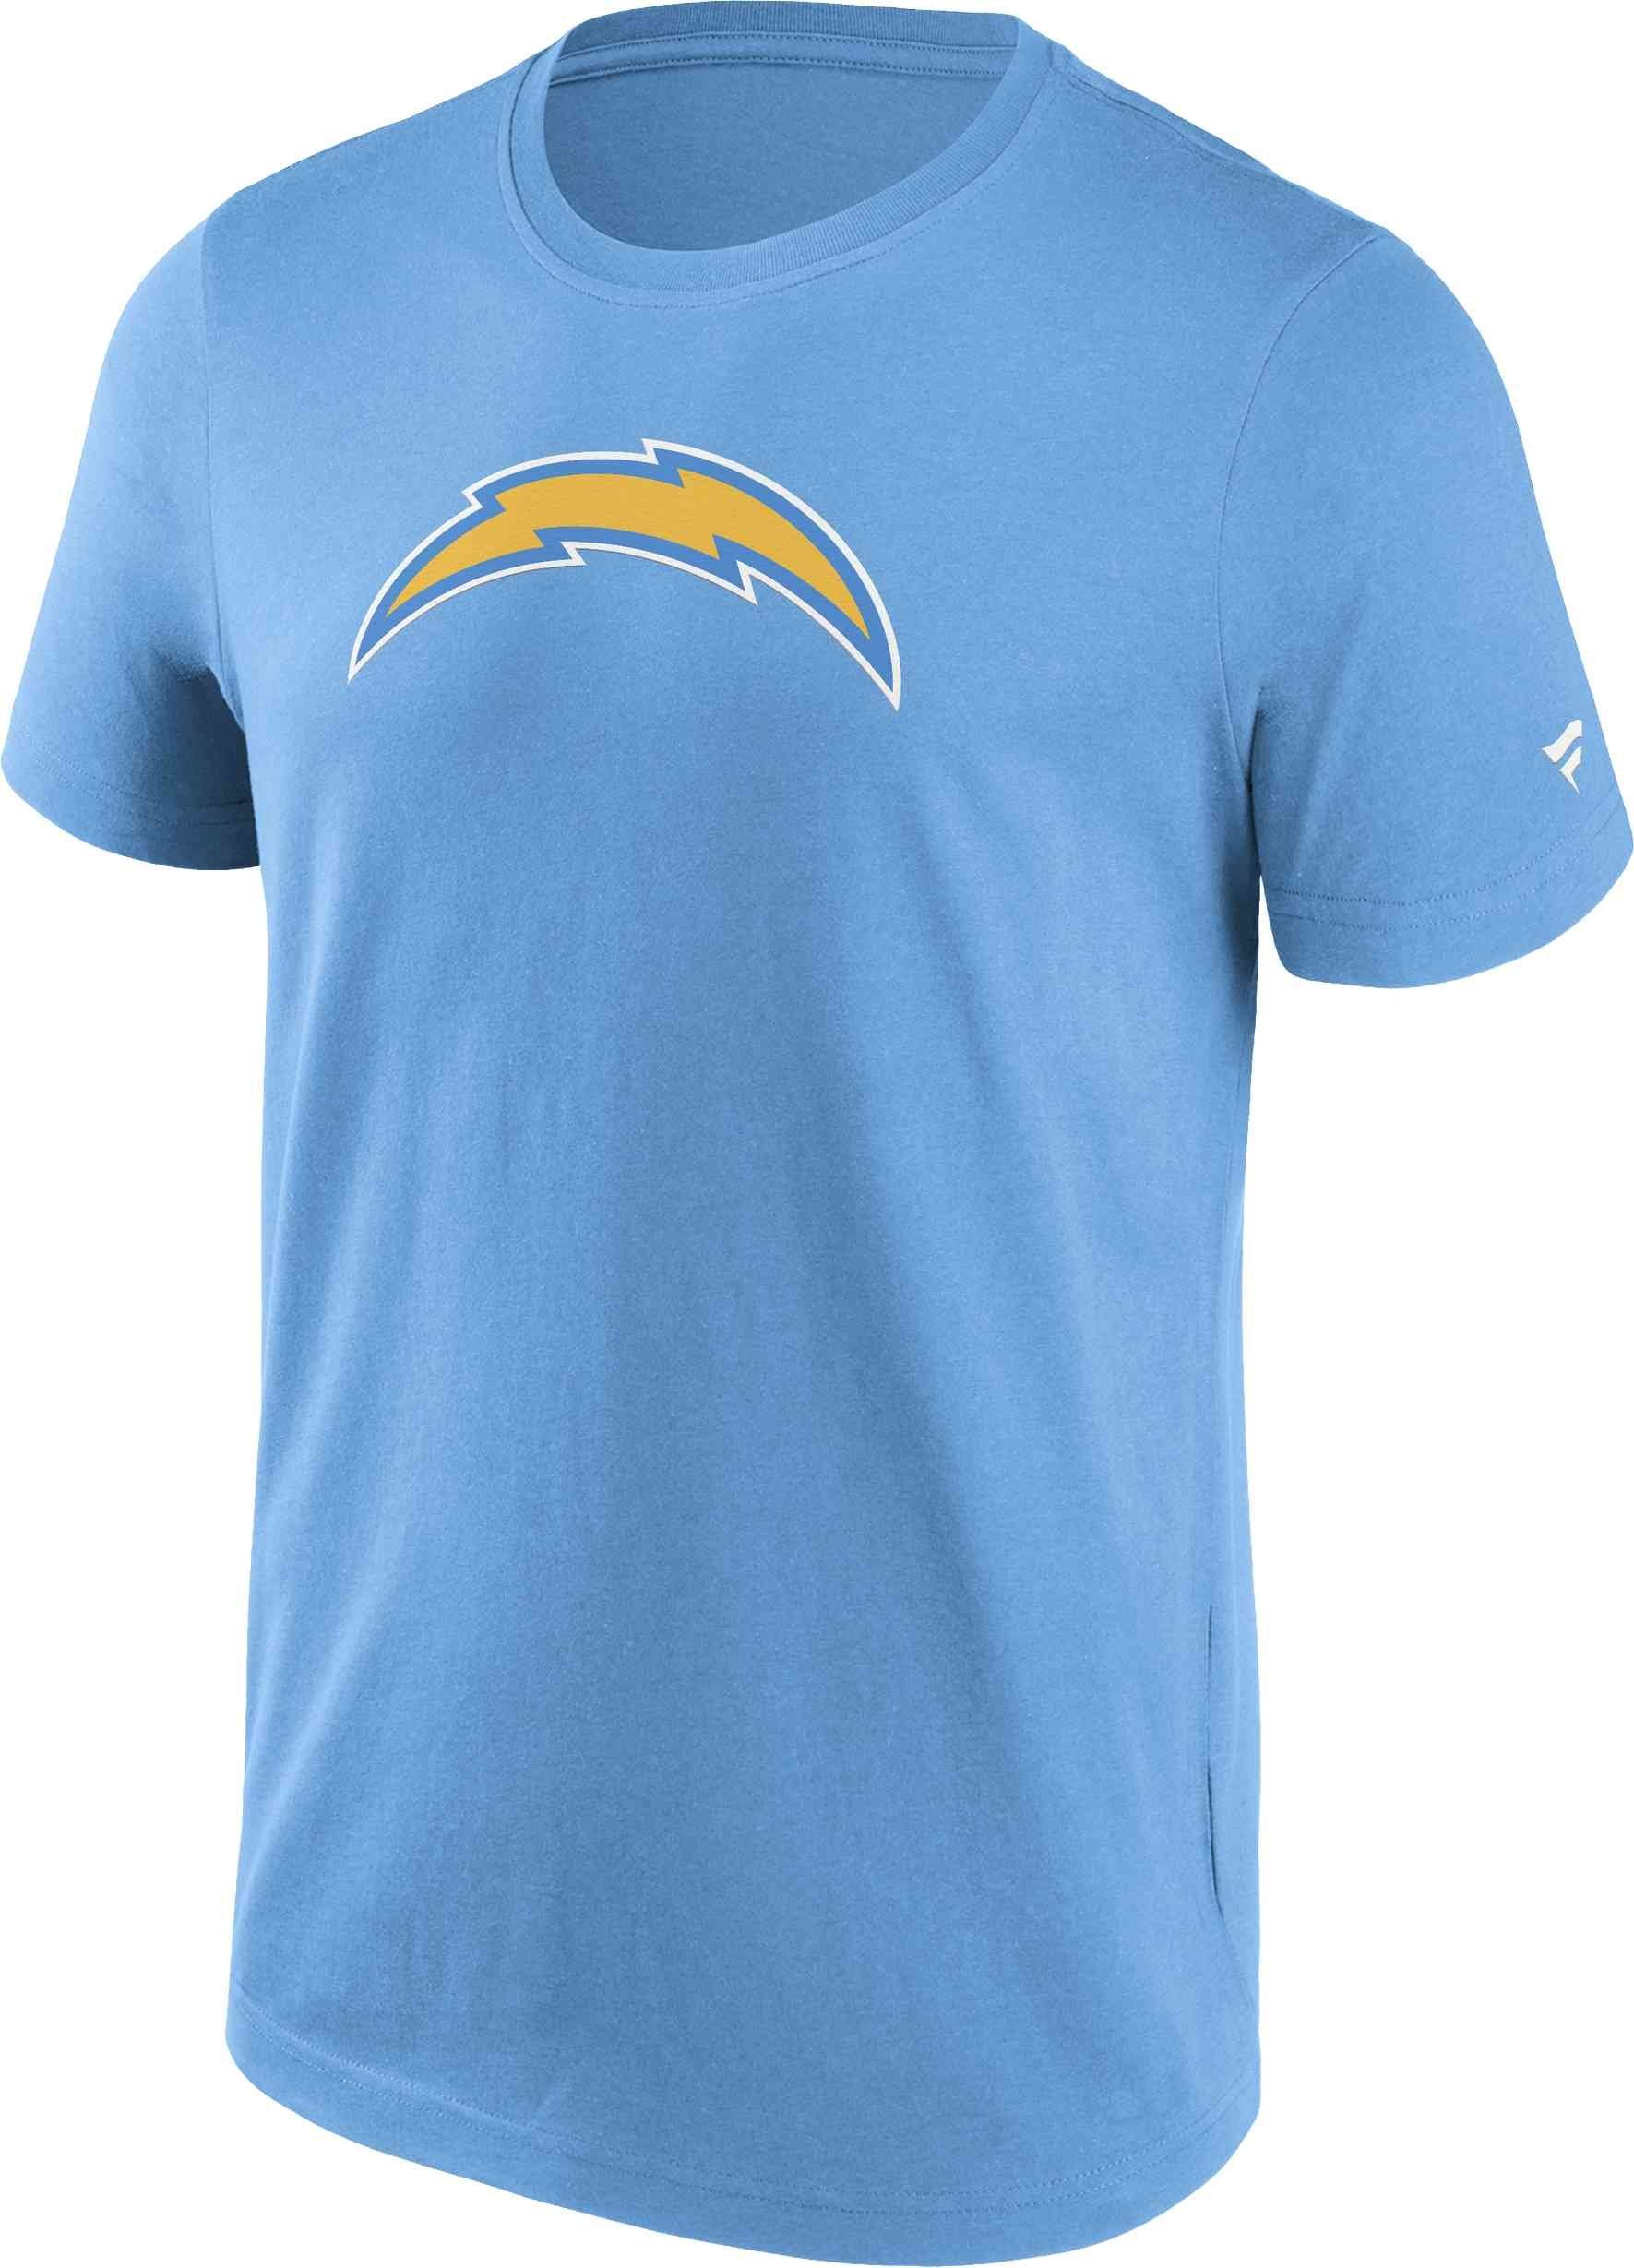 Fanatics T-Shirt NFL Los Angeles Chargers Primary Logo Graphic